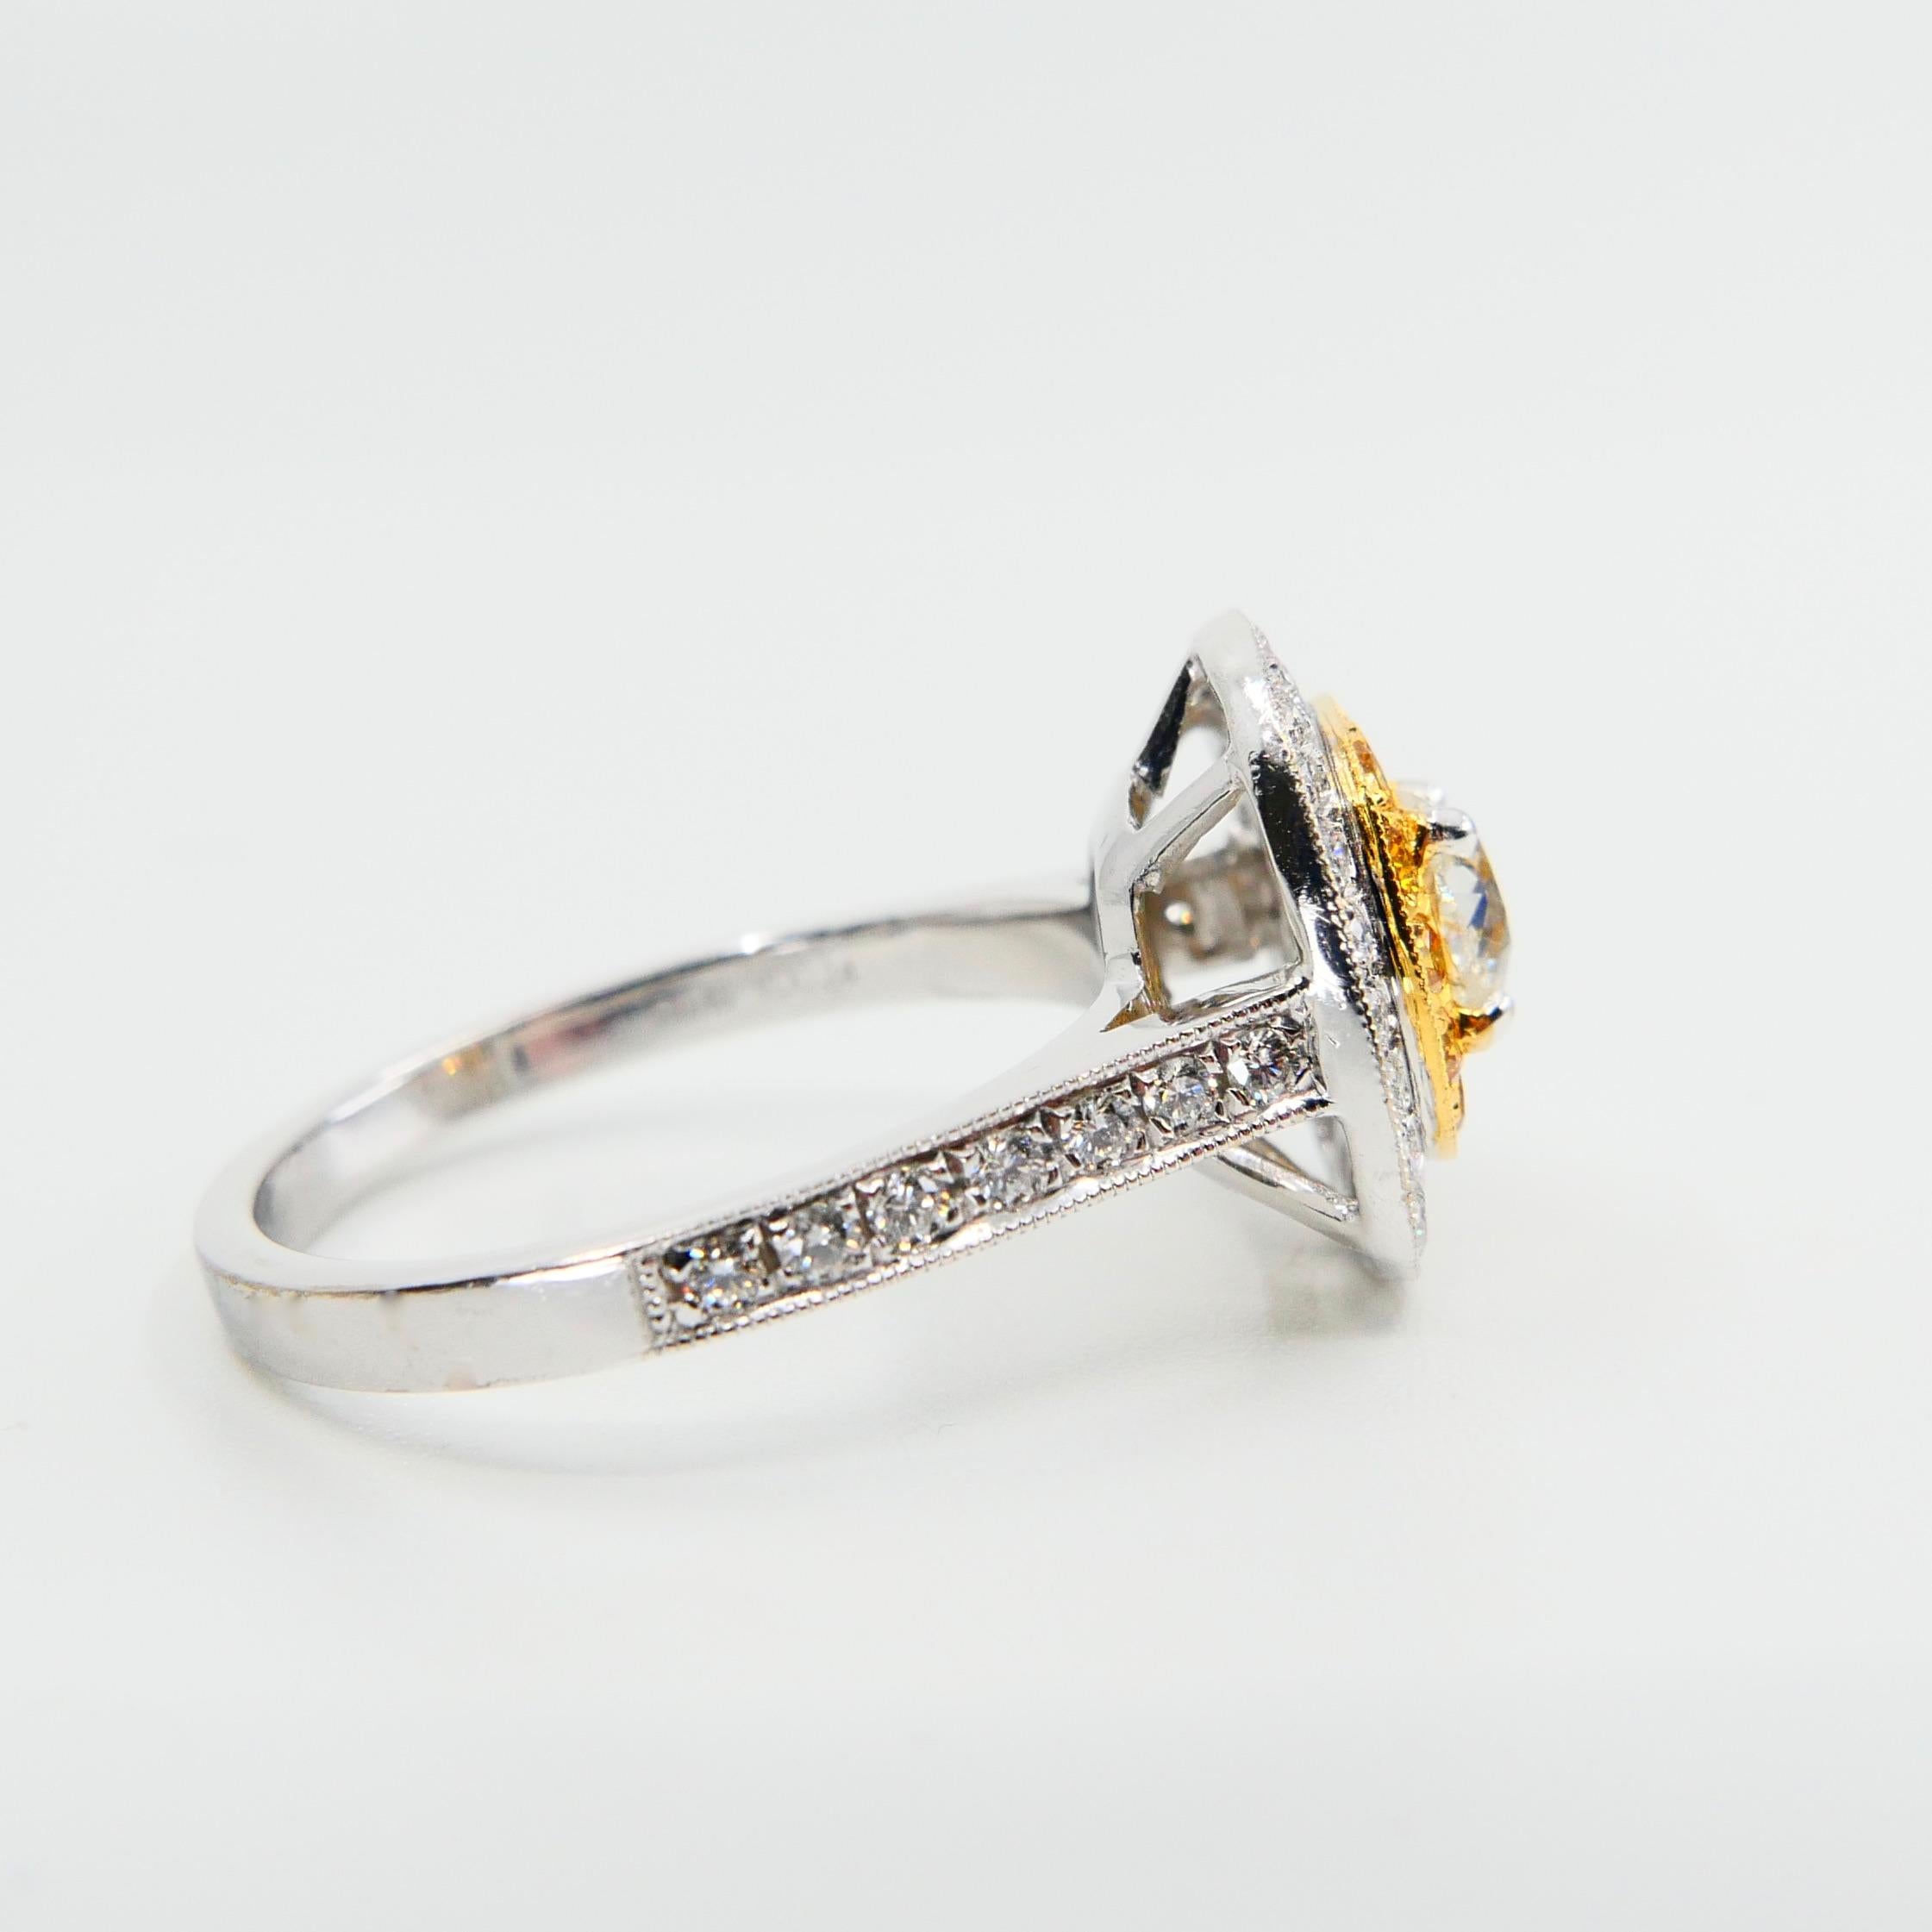 0.54 Cts Old Mine Cut & Fancy Vivid Yellow Diamond Cocktail Ring, 18K White Gold 5